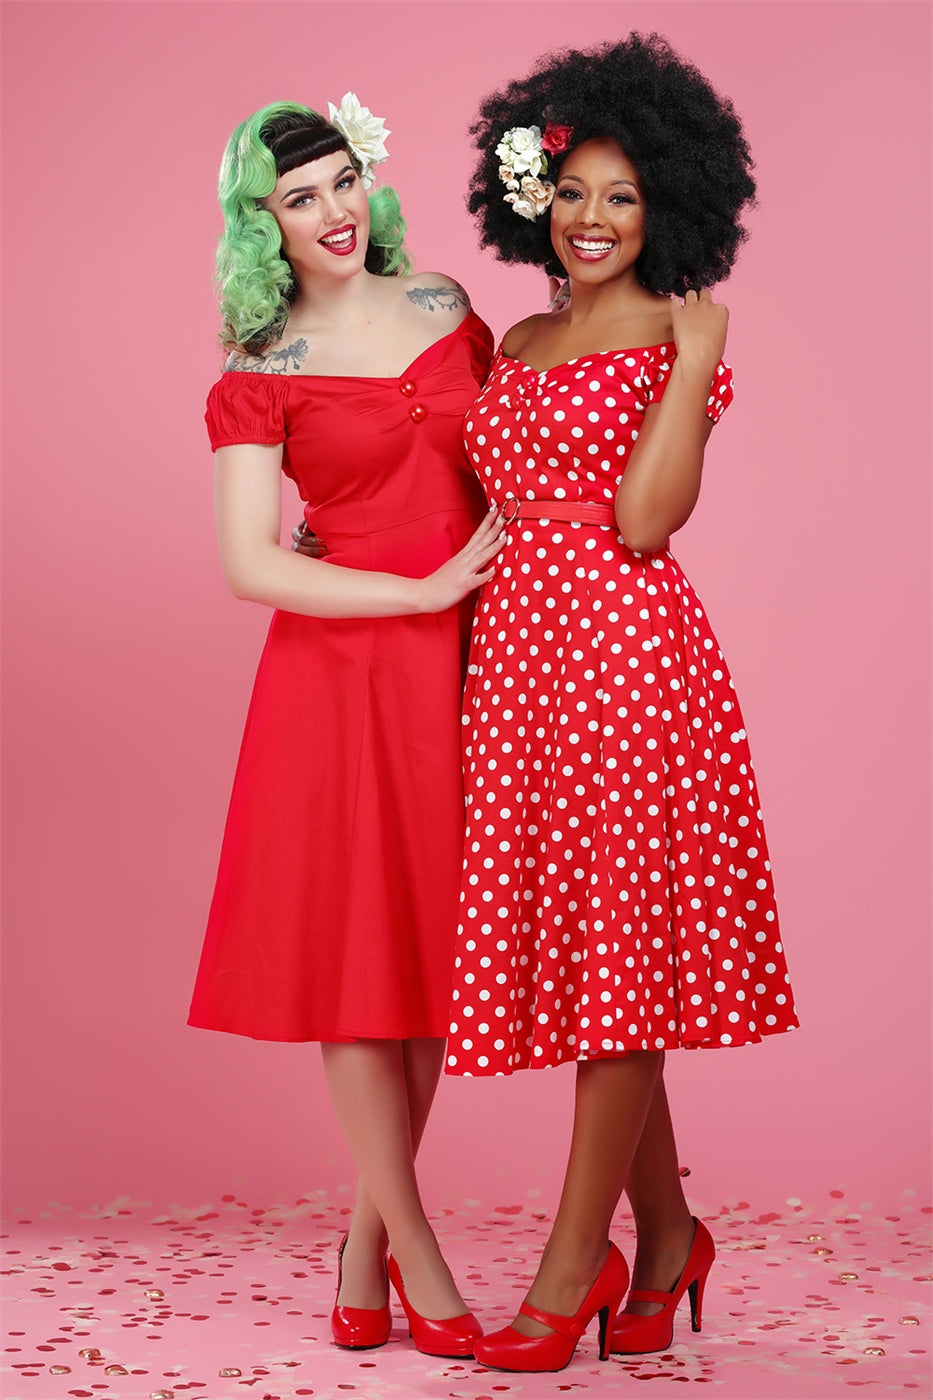 Vintage pin up style models wearing the dolores dress in red and red polka dot print and matching red heels